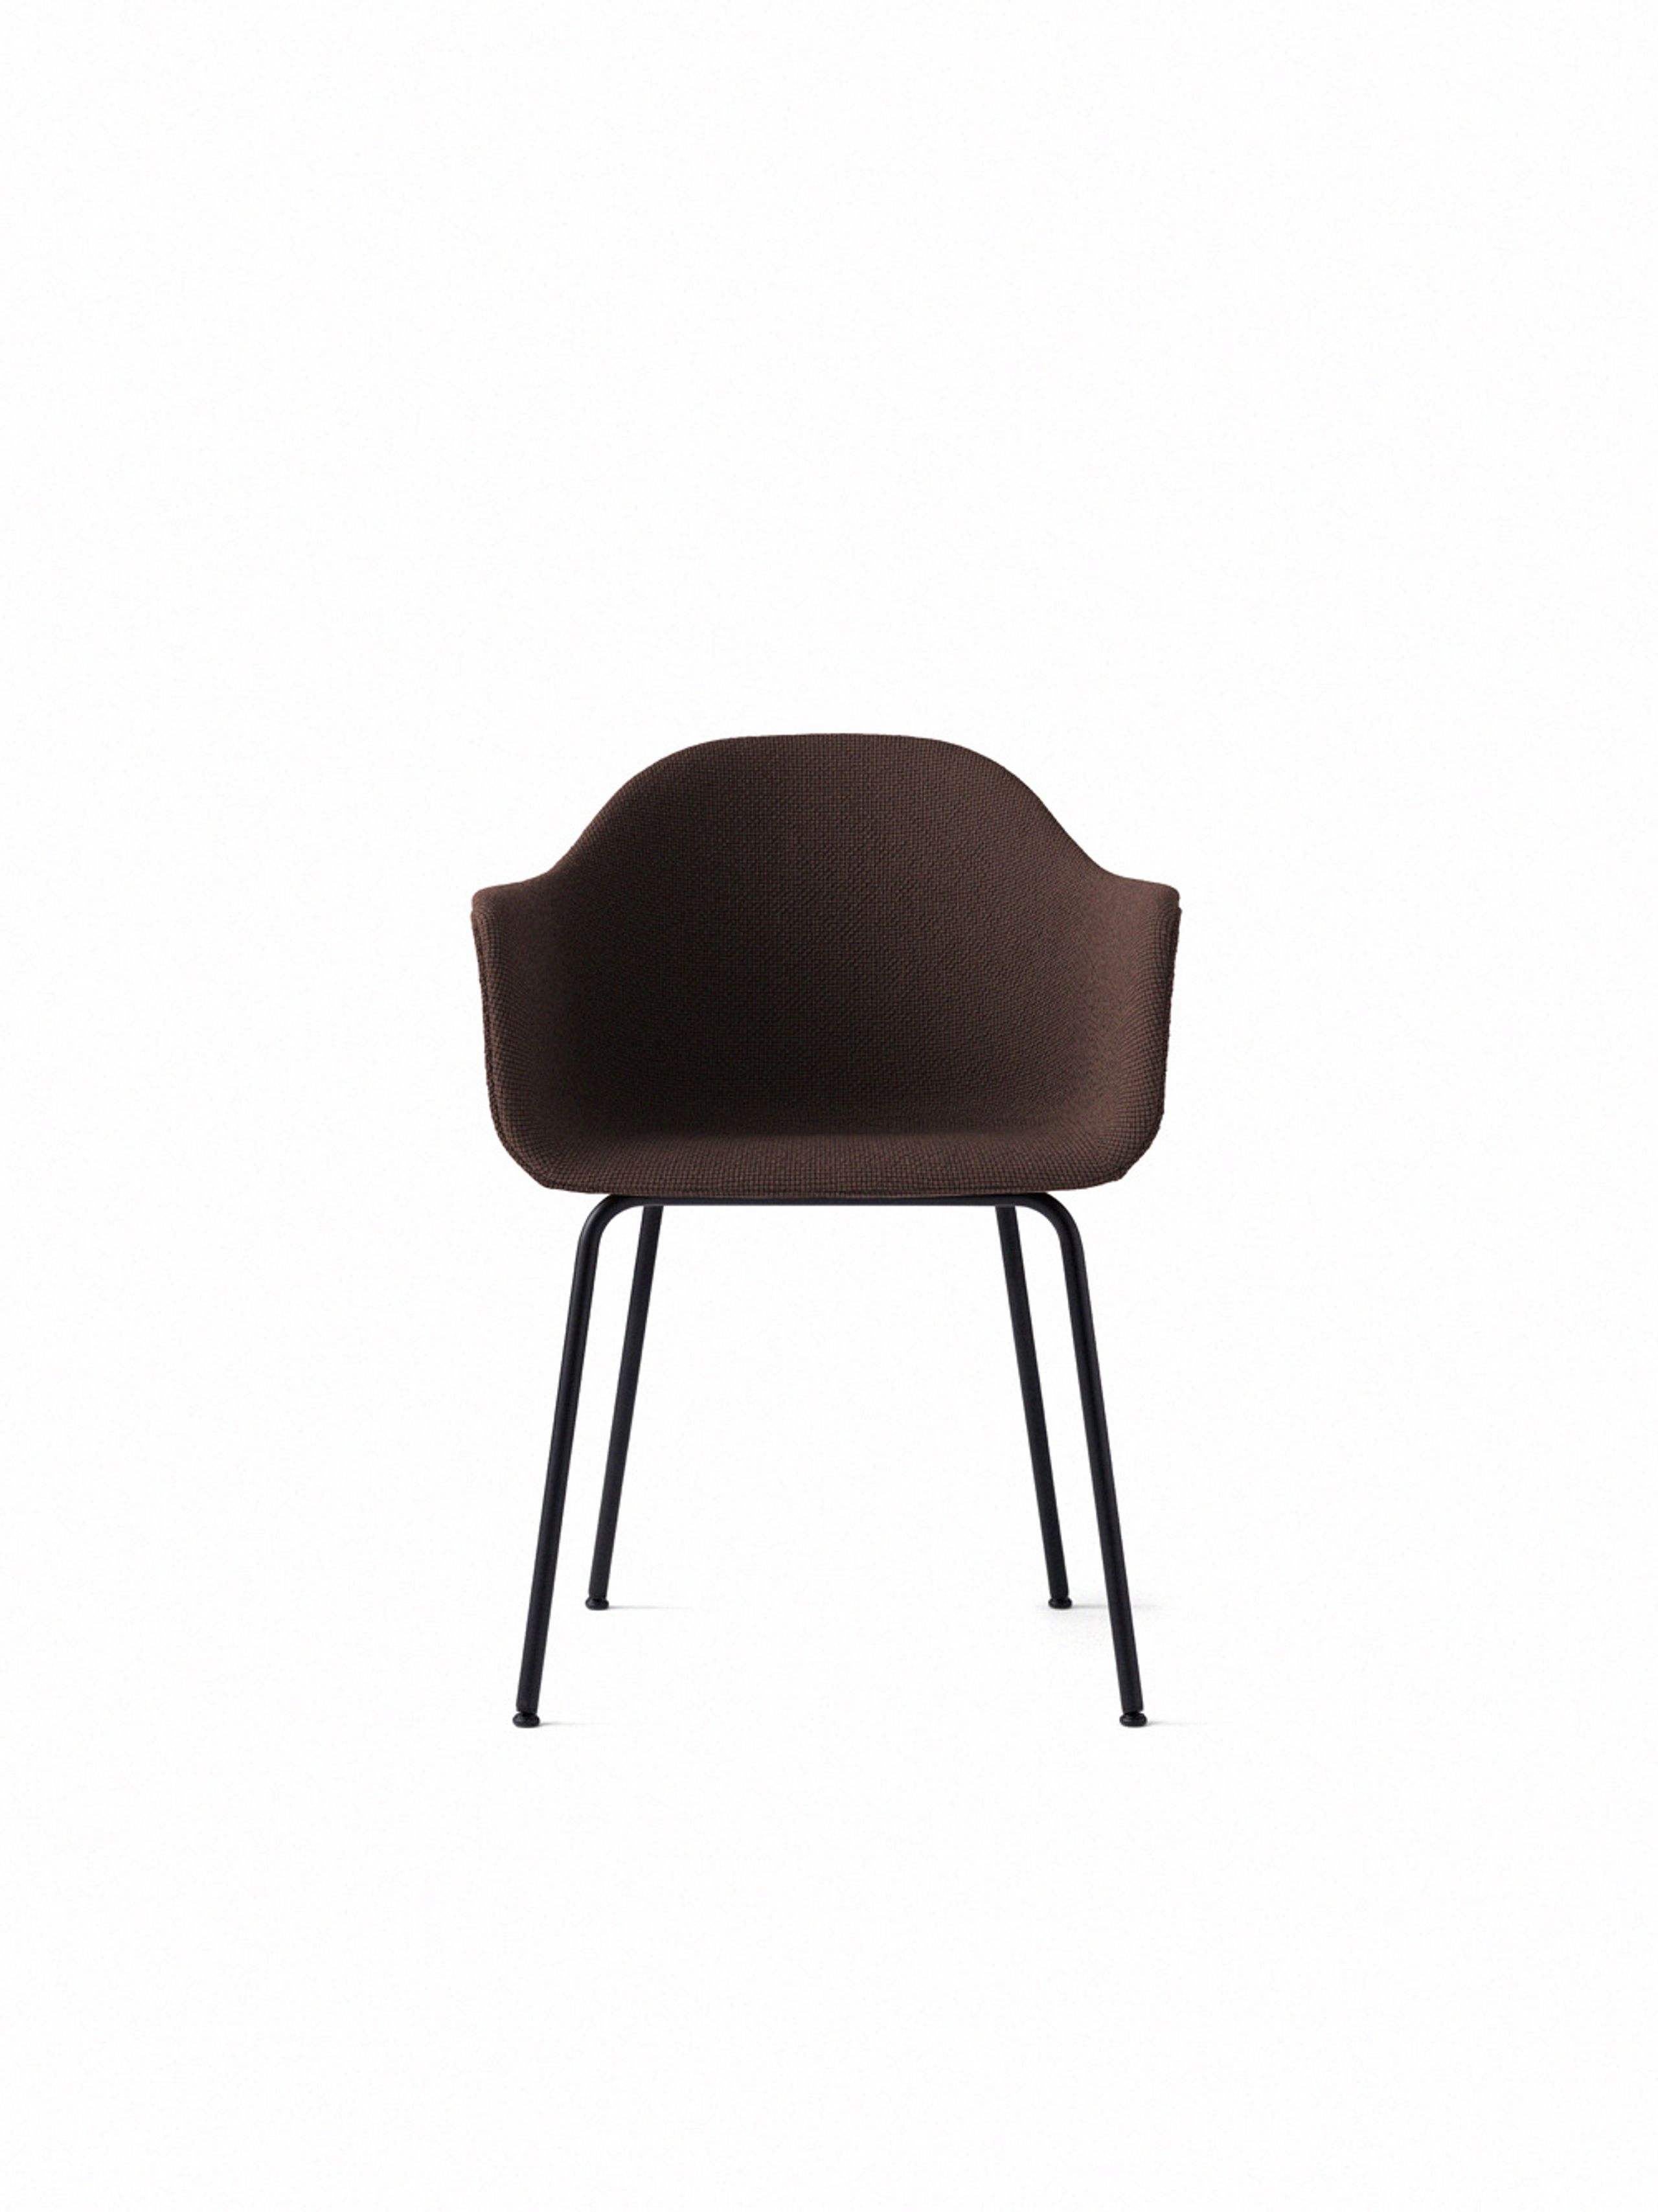 MENU - Chaise - Harbour Dining Chair / Black Steel Base - Upholstery: Colline 568